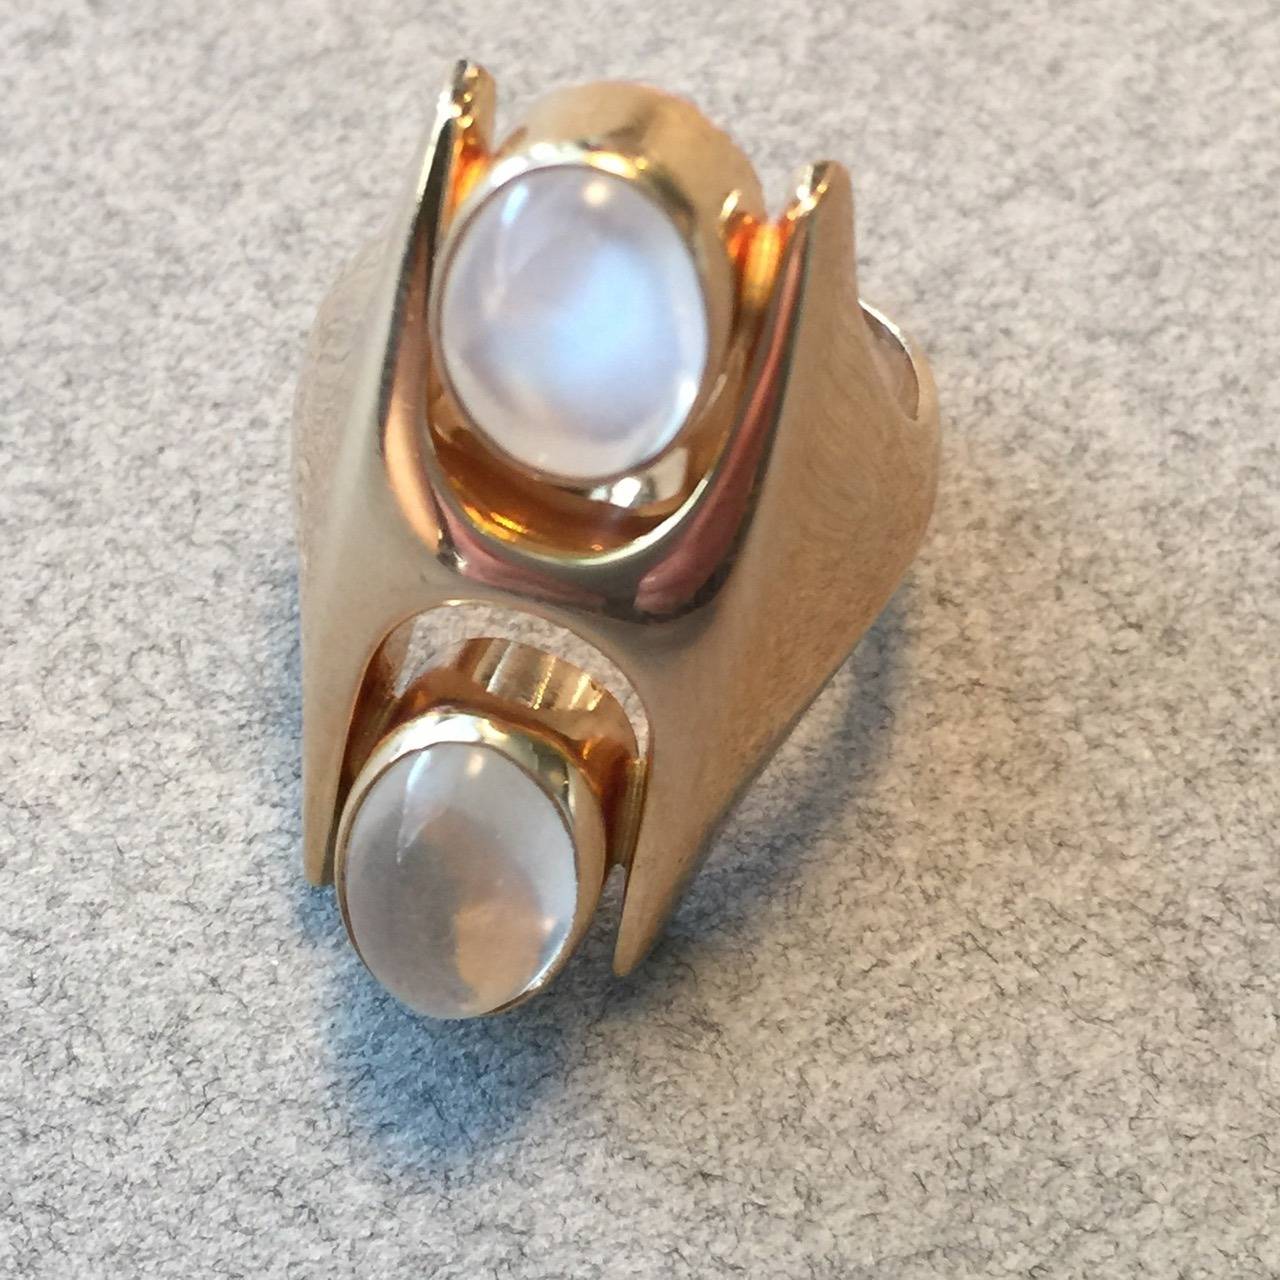 Georg Jensen Moonstone Gold Modernist Ring No. 845 by Henning Koppel 
Size 5.5
 
A similar example can be seen in the book Georg Jensen 